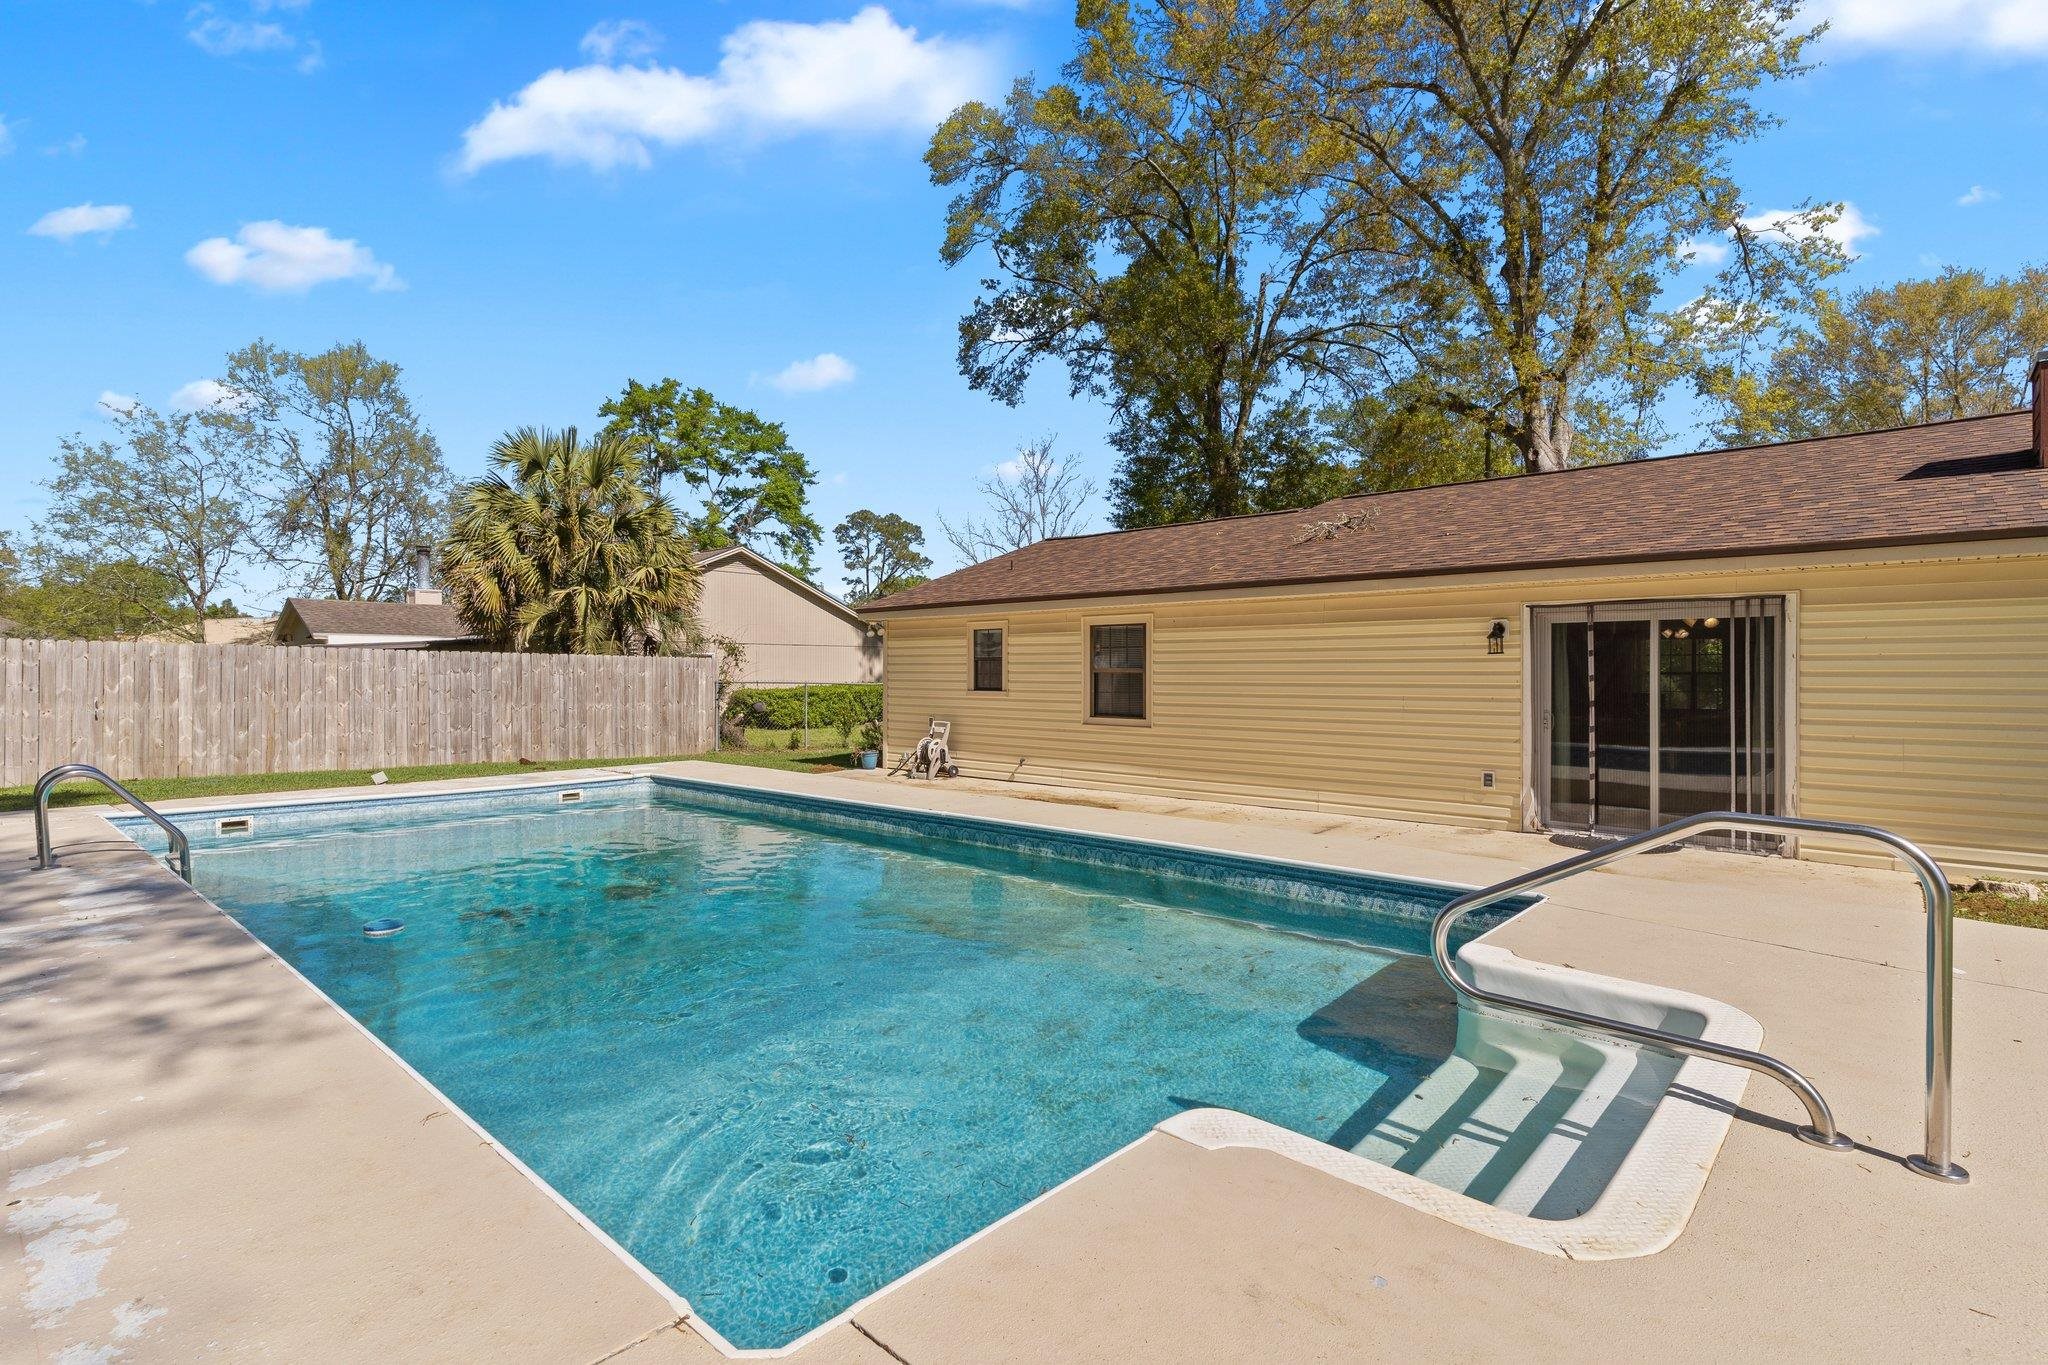 3129 Lookout Trail,TALLAHASSEE,Florida 32309,3 Bedrooms Bedrooms,2 BathroomsBathrooms,Detached single family,3129 Lookout Trail,369944